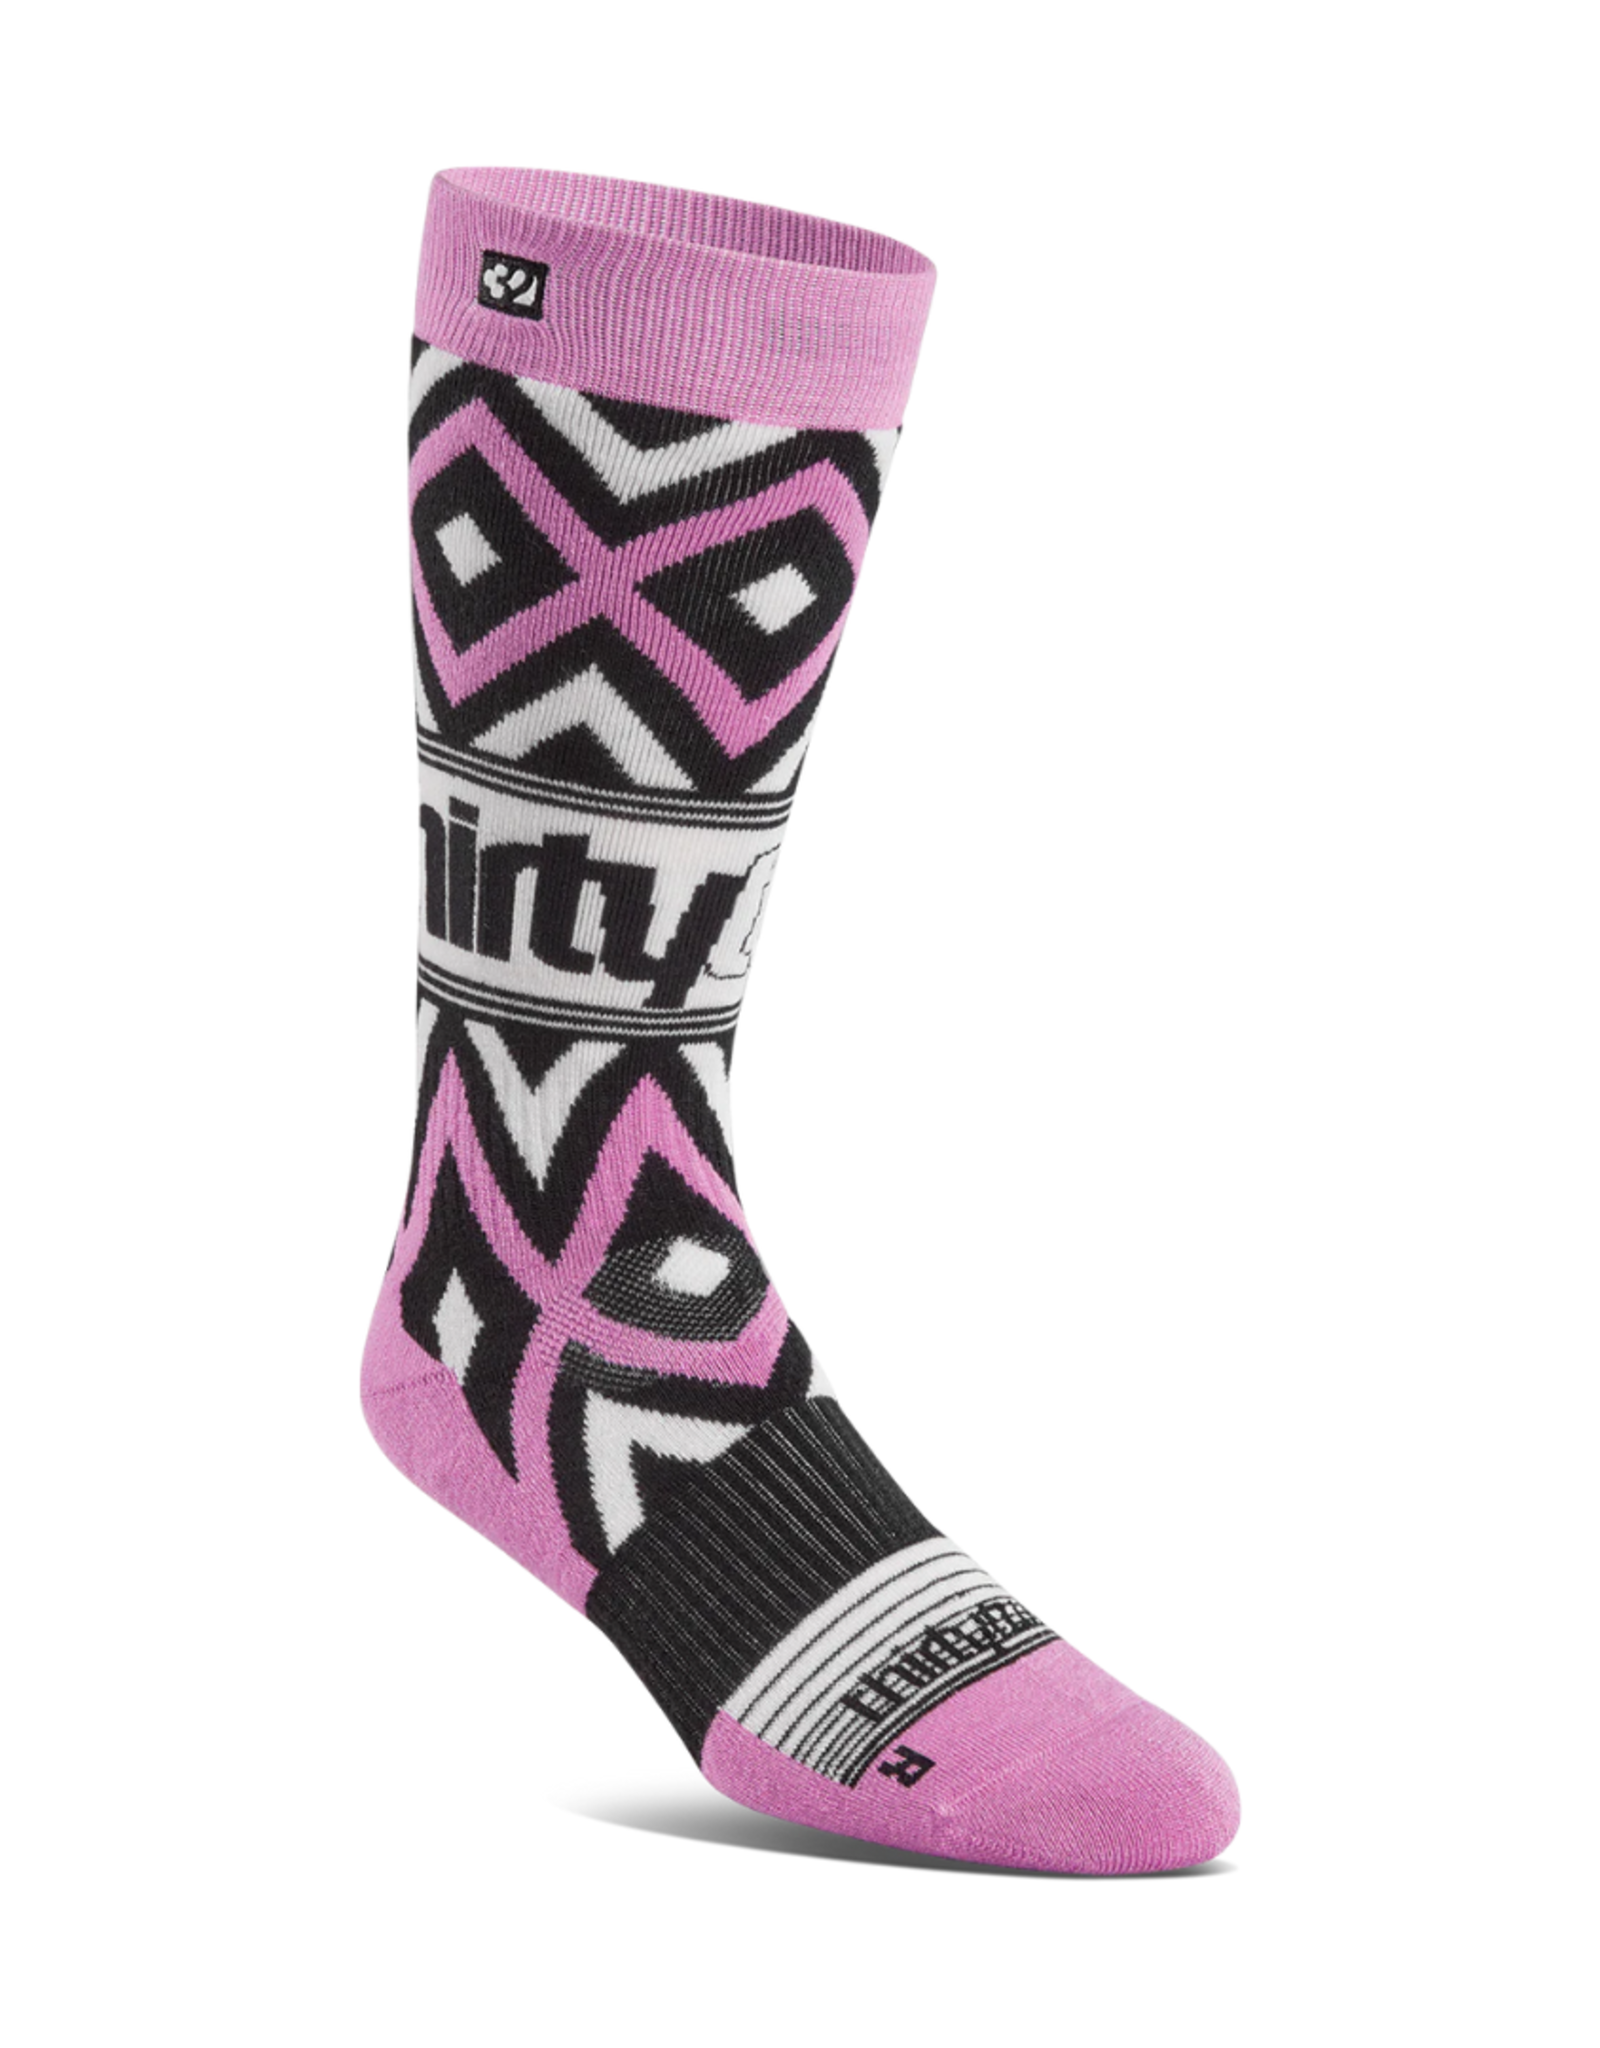 THIRTYTWO SNOWBOARD BOOTS THIRTYTWO - WOMENS DOUBLE SOCK LAVENDER